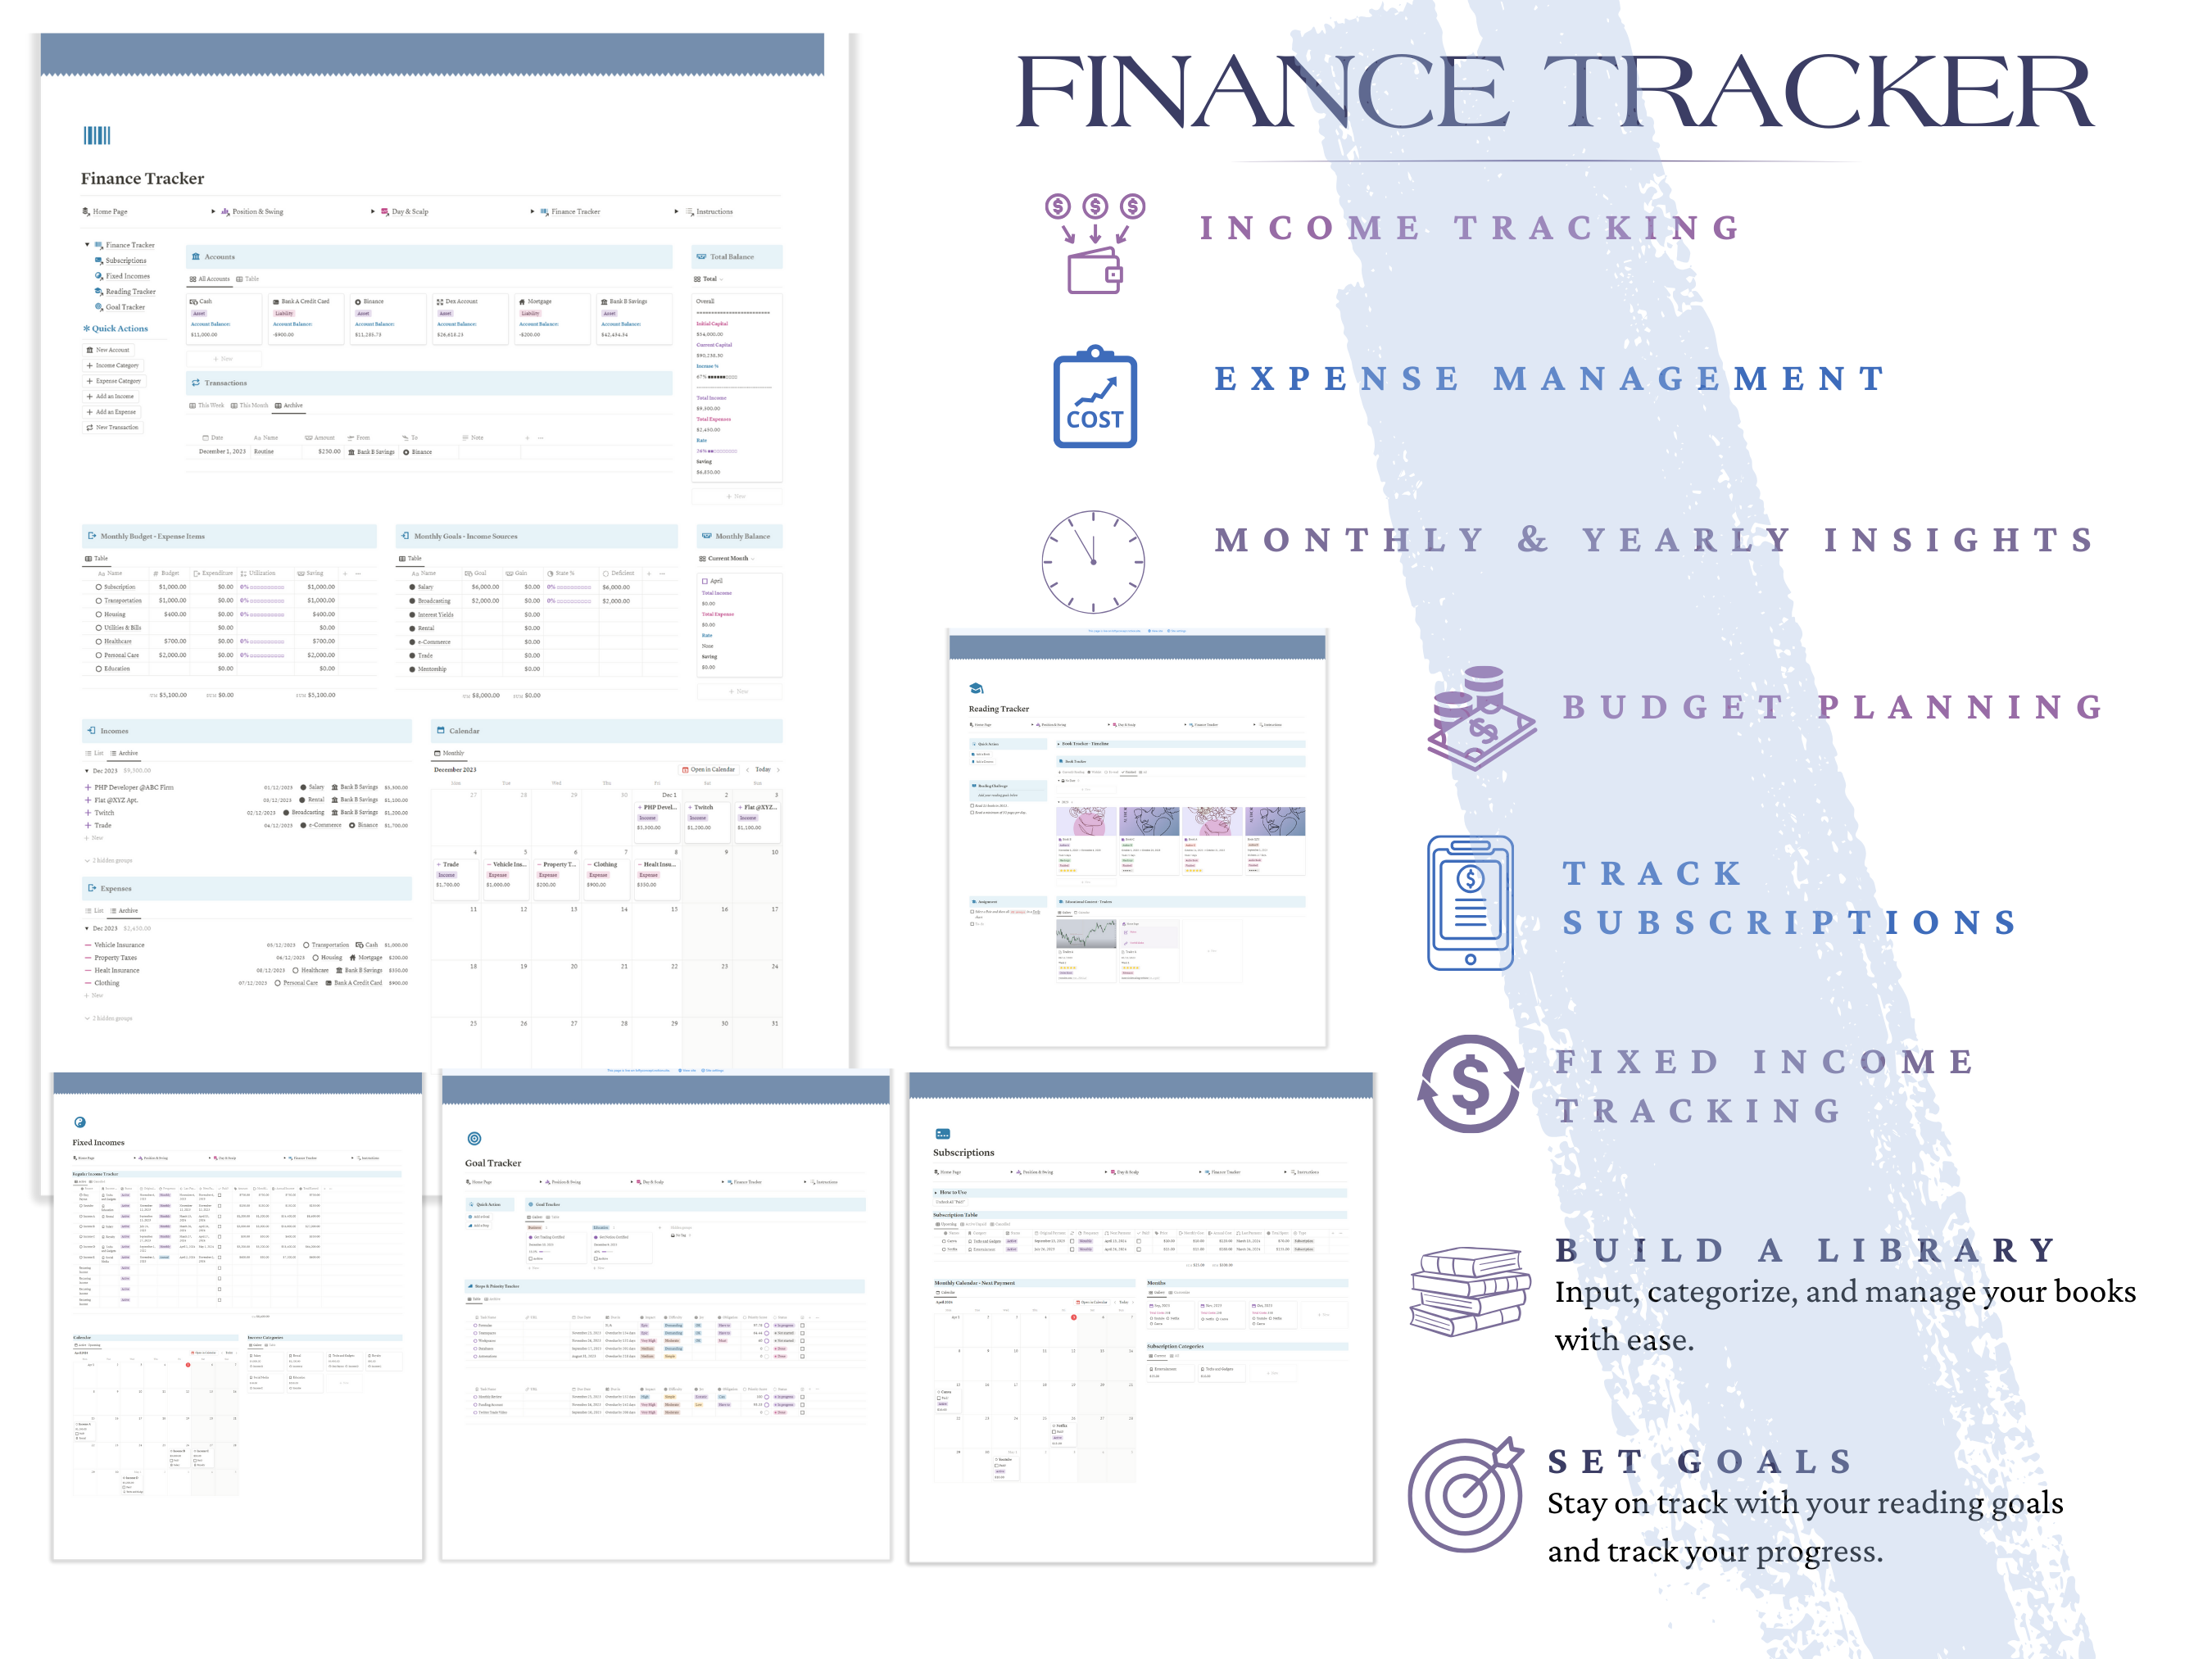 Elevate your trading with the Notion Portfolio Tracker & Notion Trading Journal! 
Track your portfolio, document trades, manage risk, and optimize your routine. Enjoy weekly, monthly, and yearly performance reviews, interactive dashboards, and real-time financial widgets. 